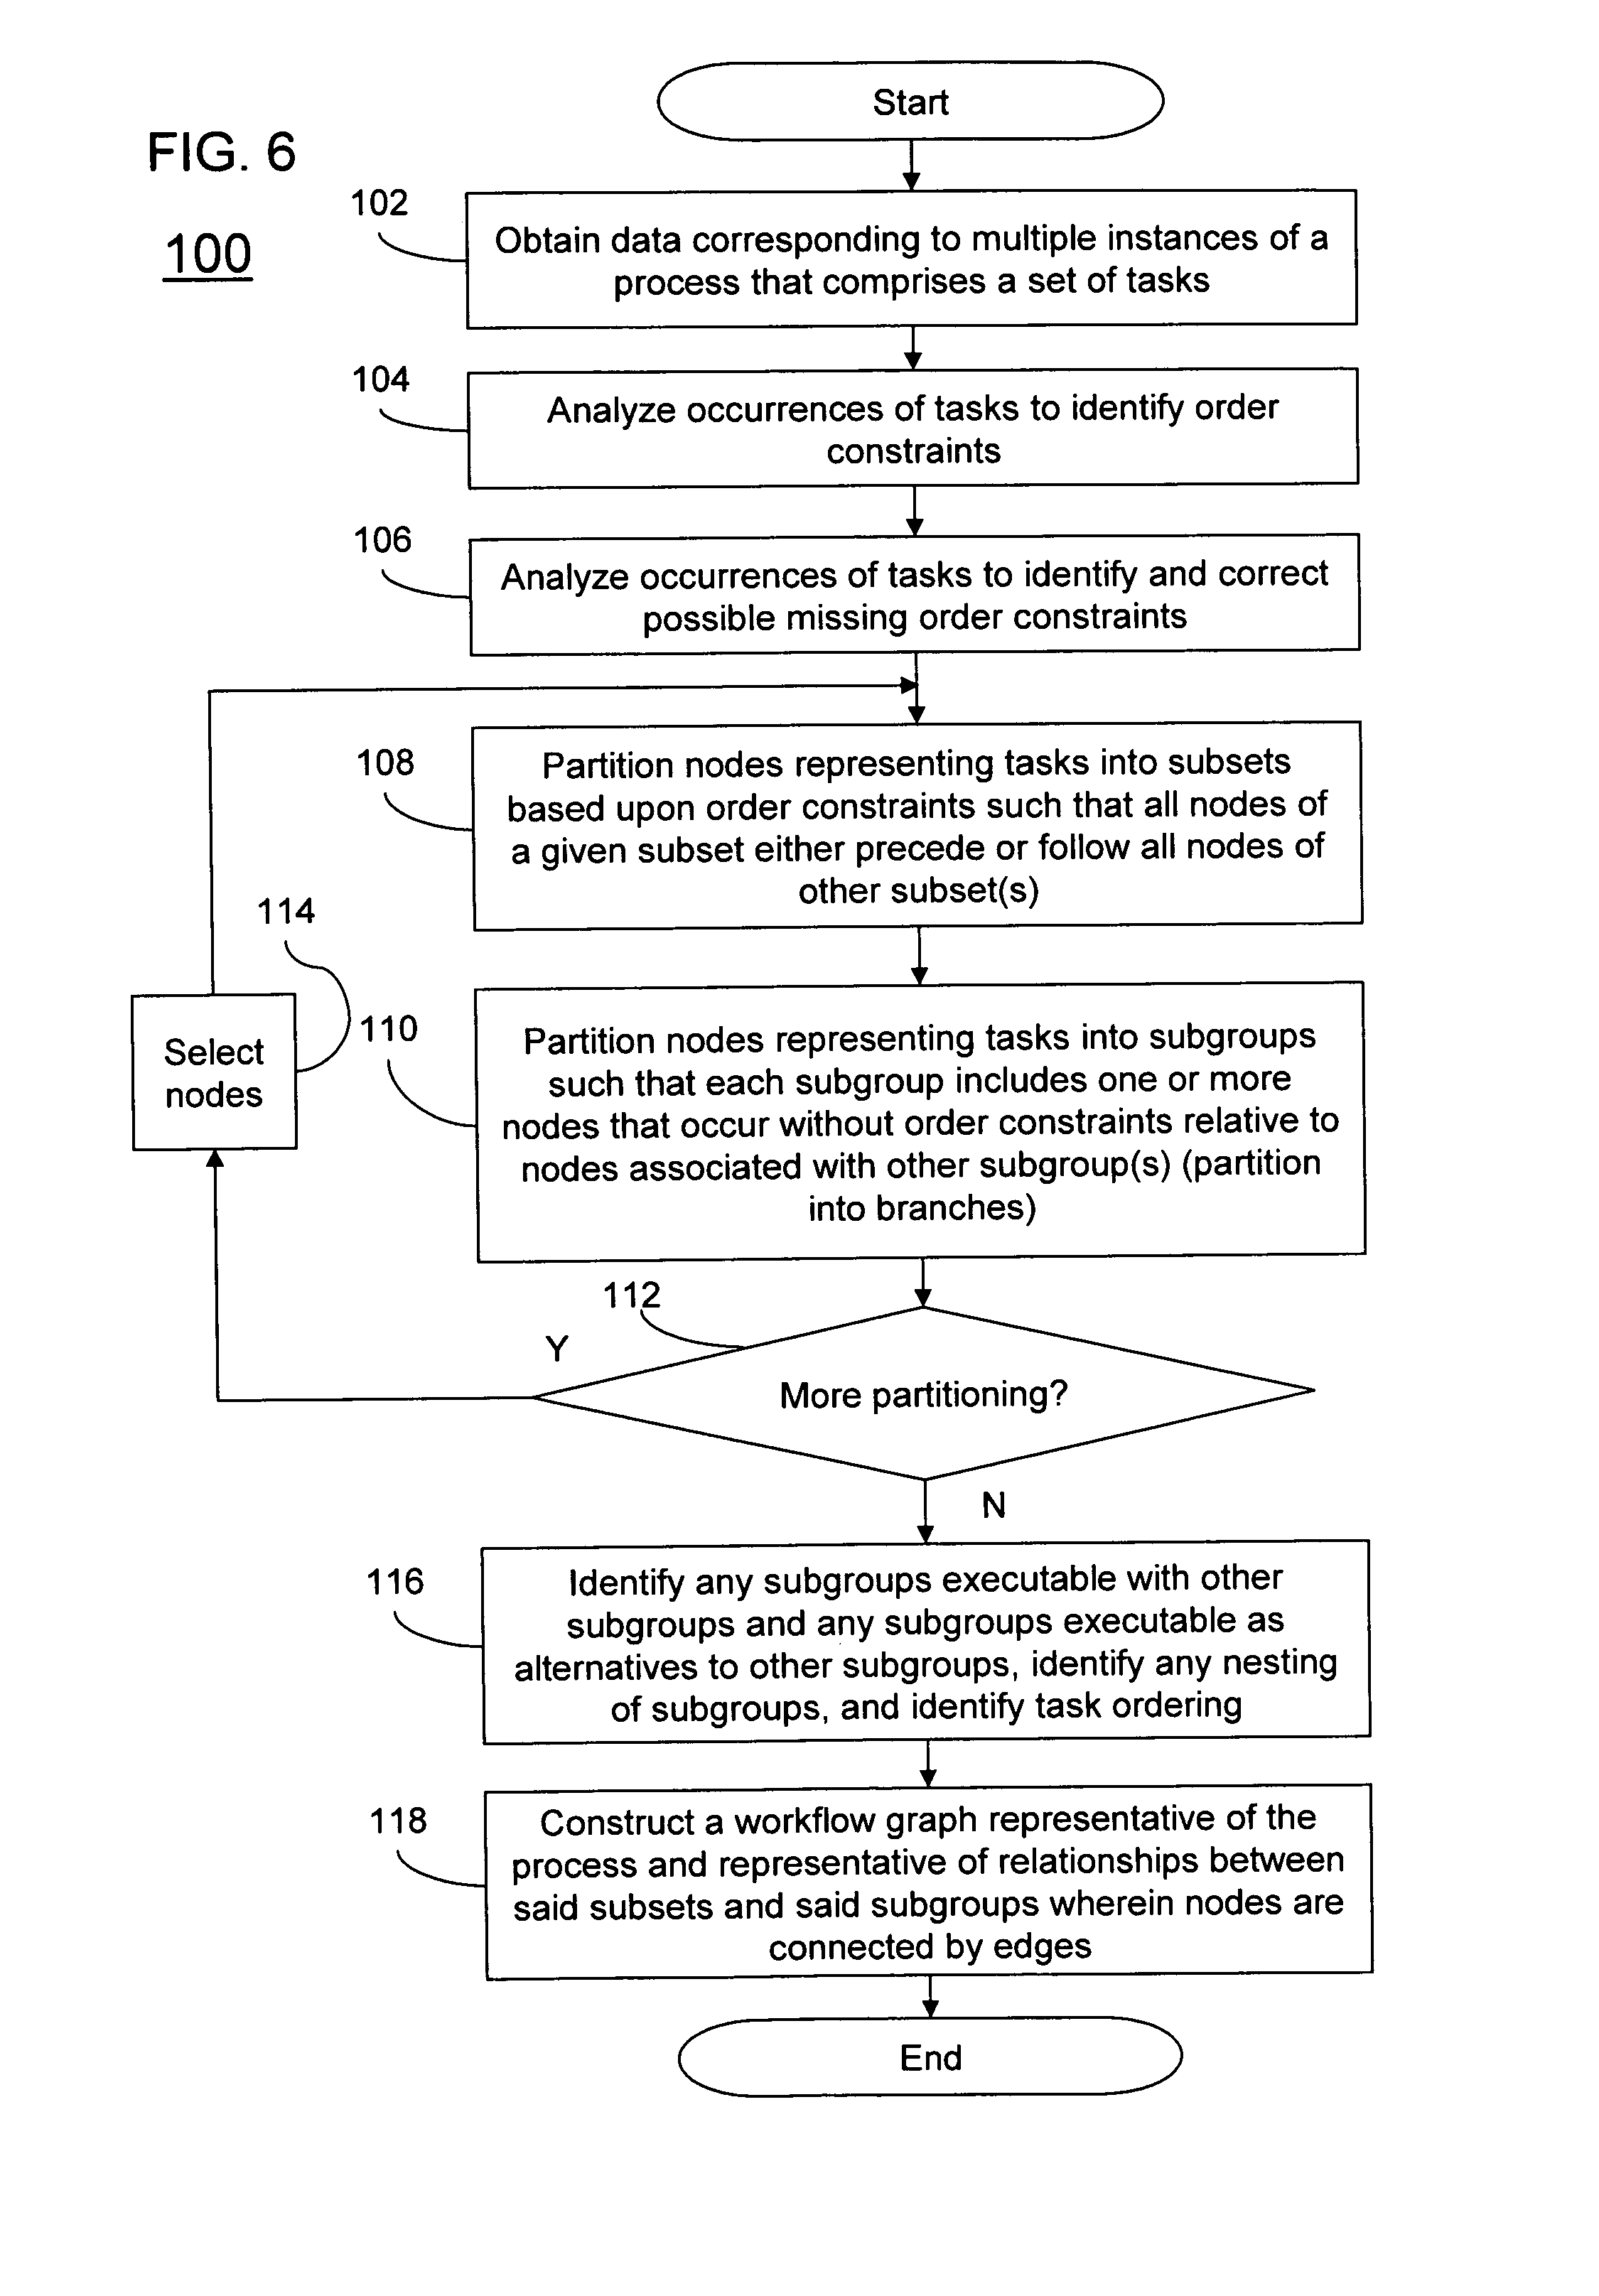 Methods and apparatus for identifying workflow graphs using an iterative analysis of empirical data